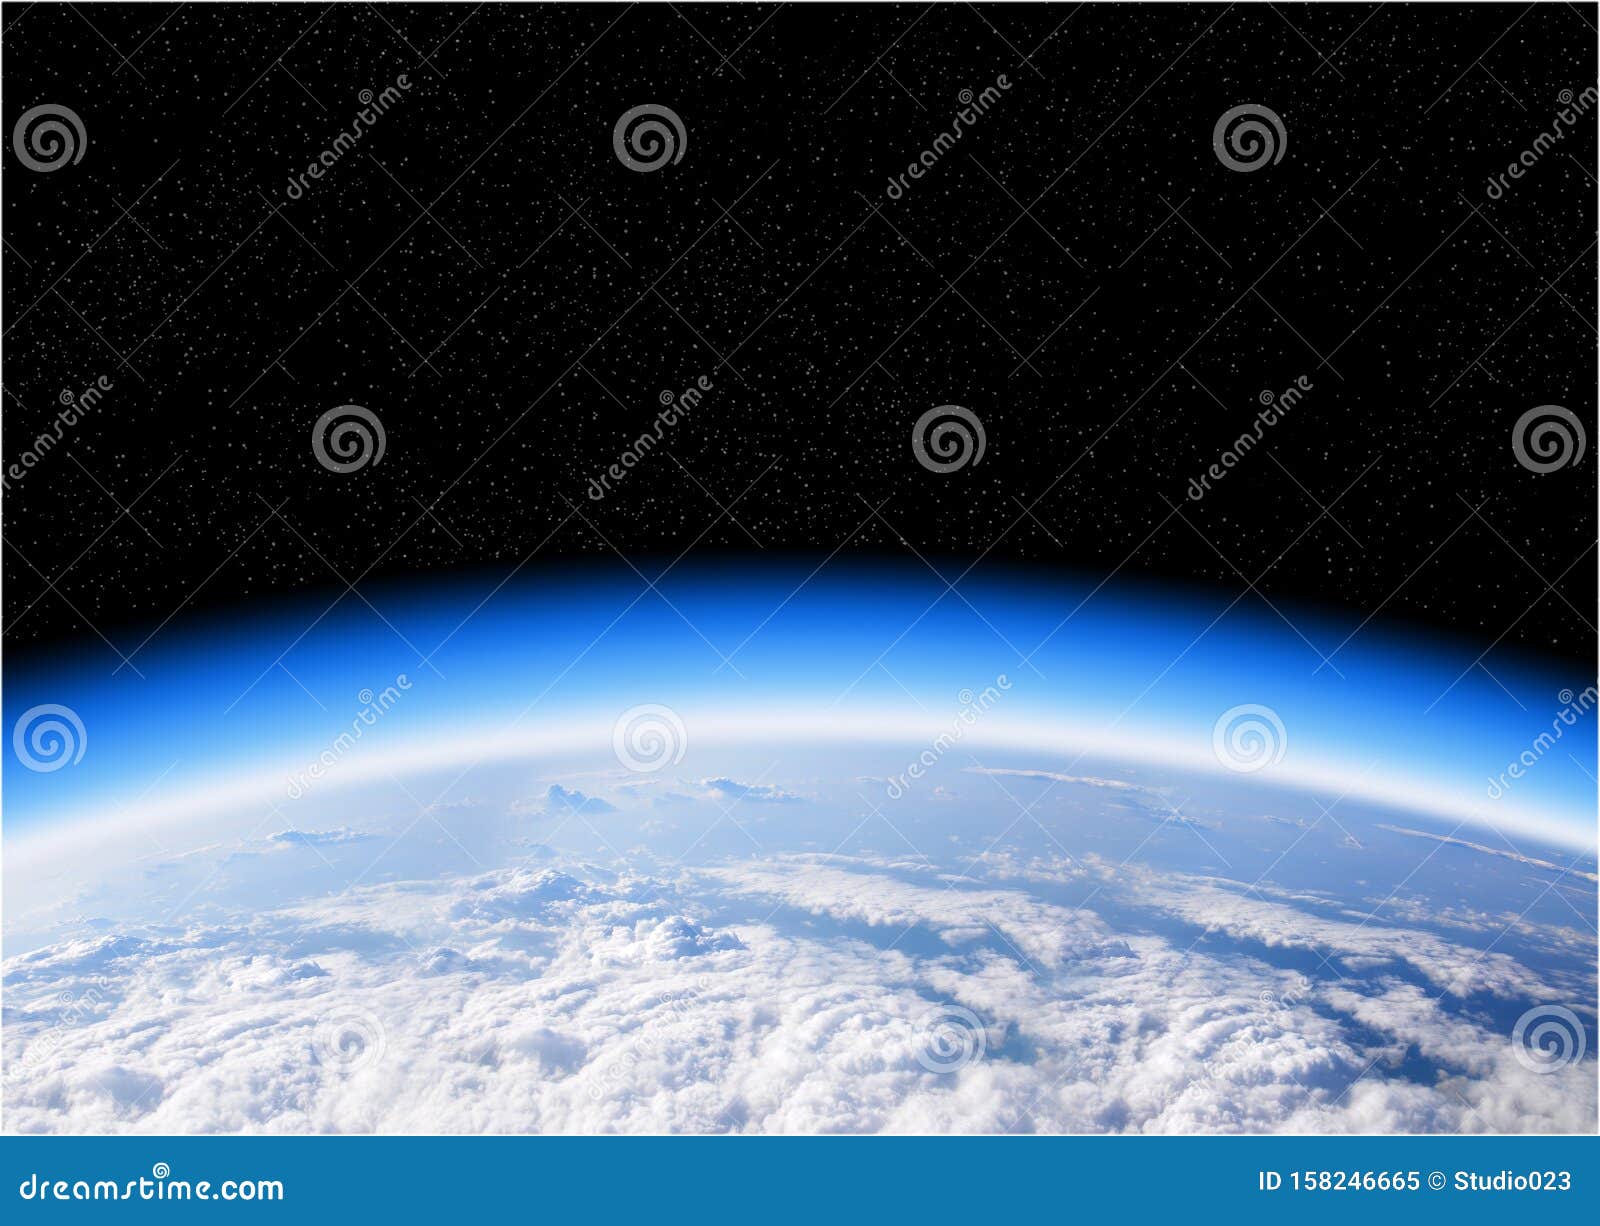 ozone layer from space view of planet earth